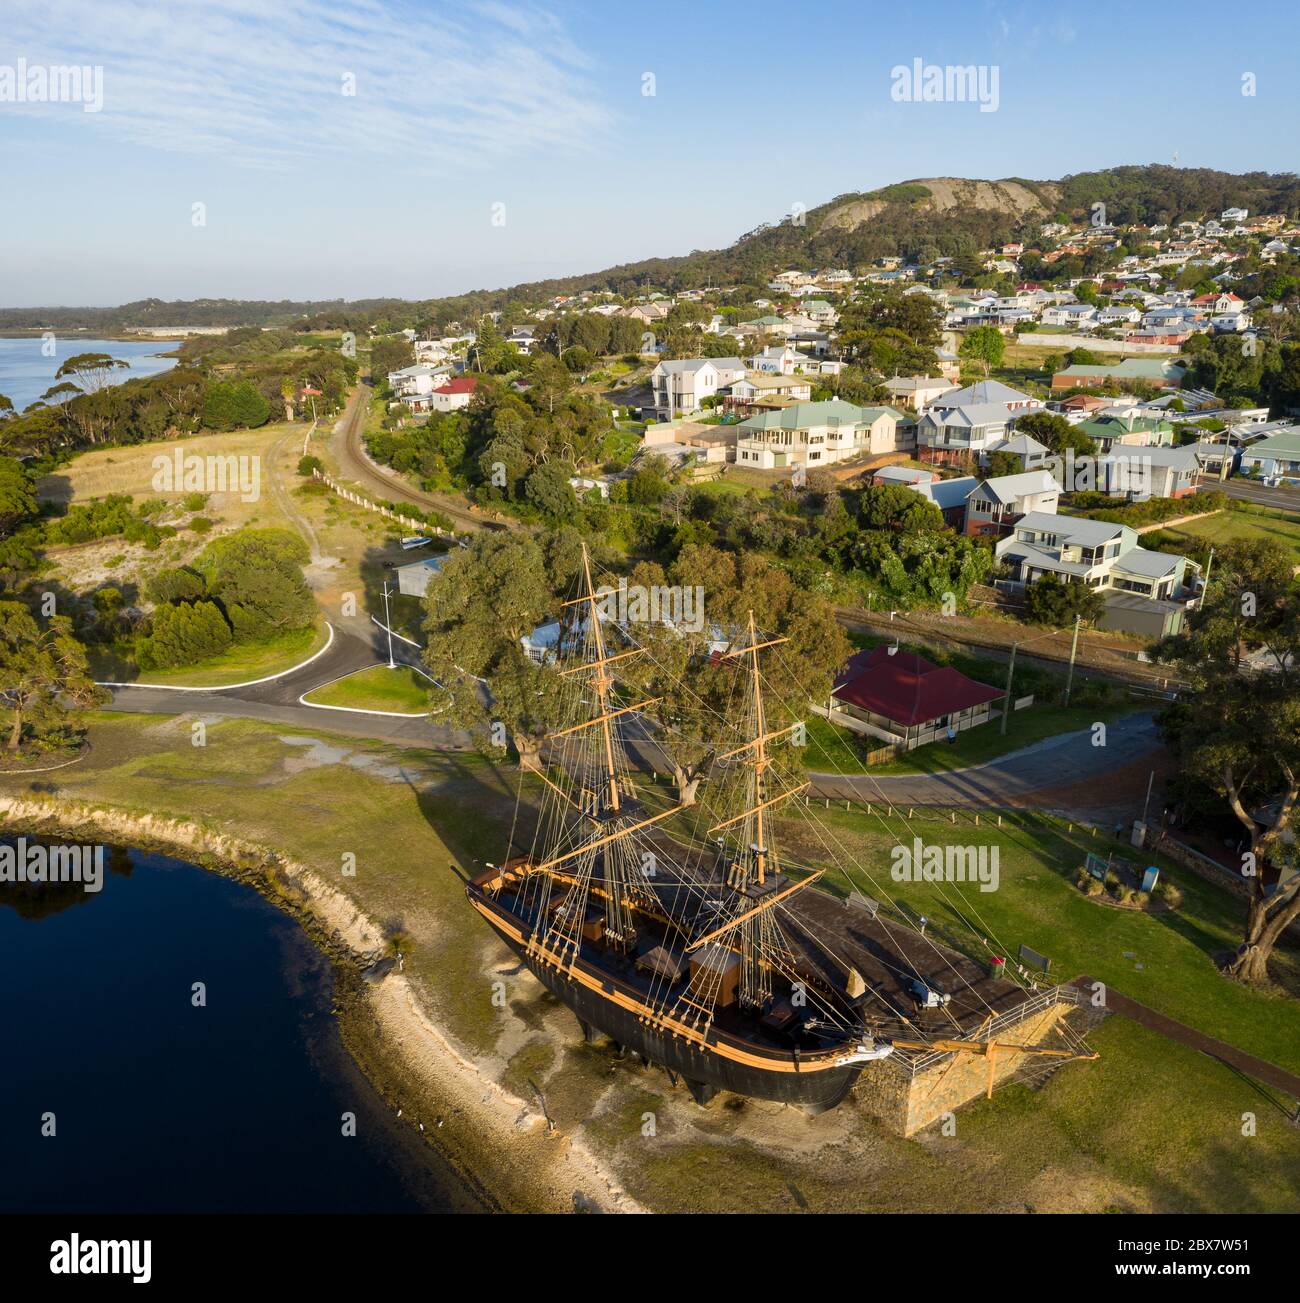 Albany Western Australia November 10th 2019 : Aerial drone view of the replica of the Amity Brig, which is a local tourist attraction built in 1976 Stock Photo